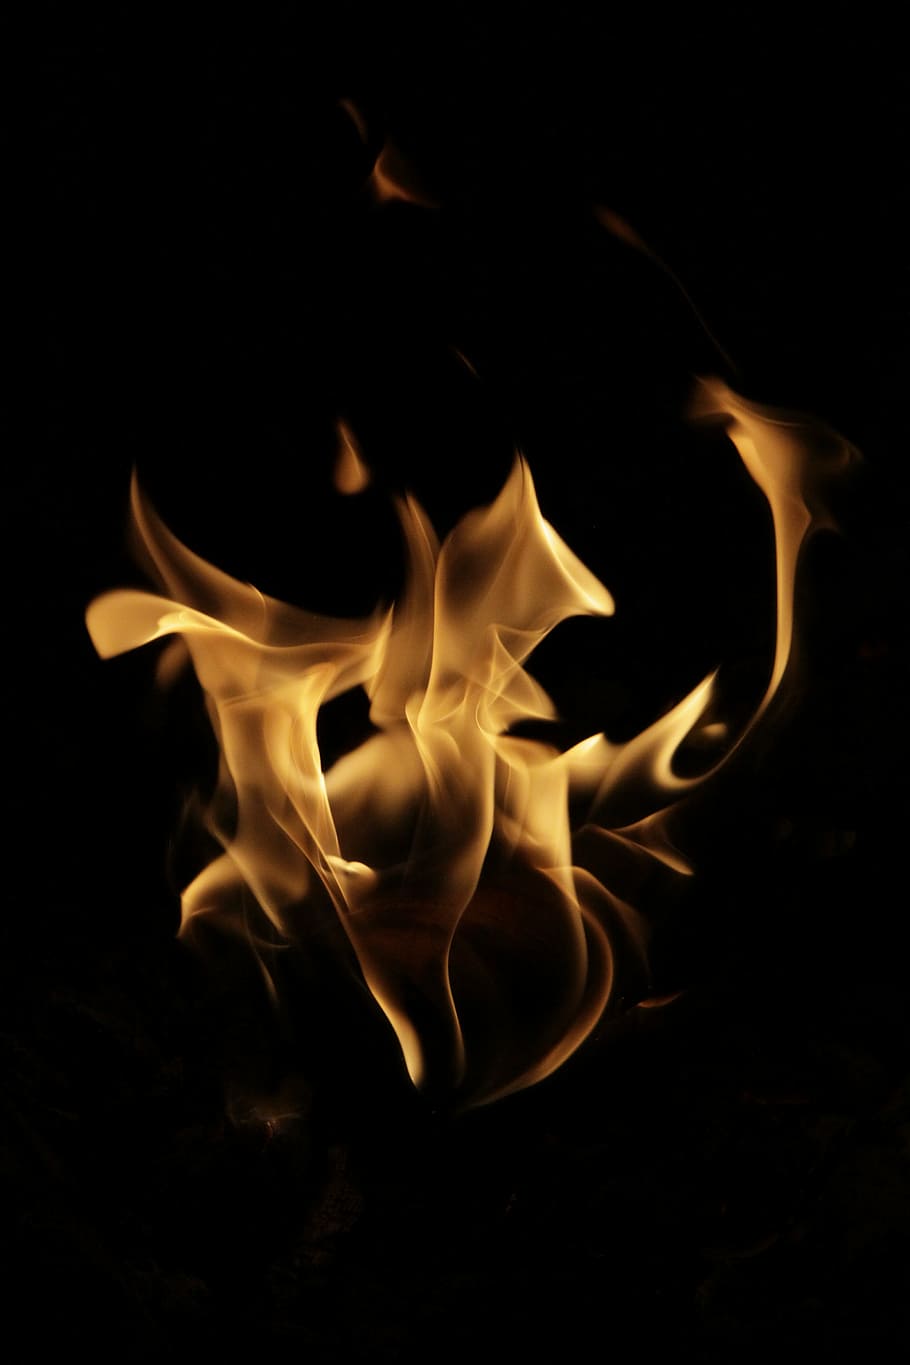 photography of flame, fire, night, light, flame, energy, burning, nature, orange, yellow